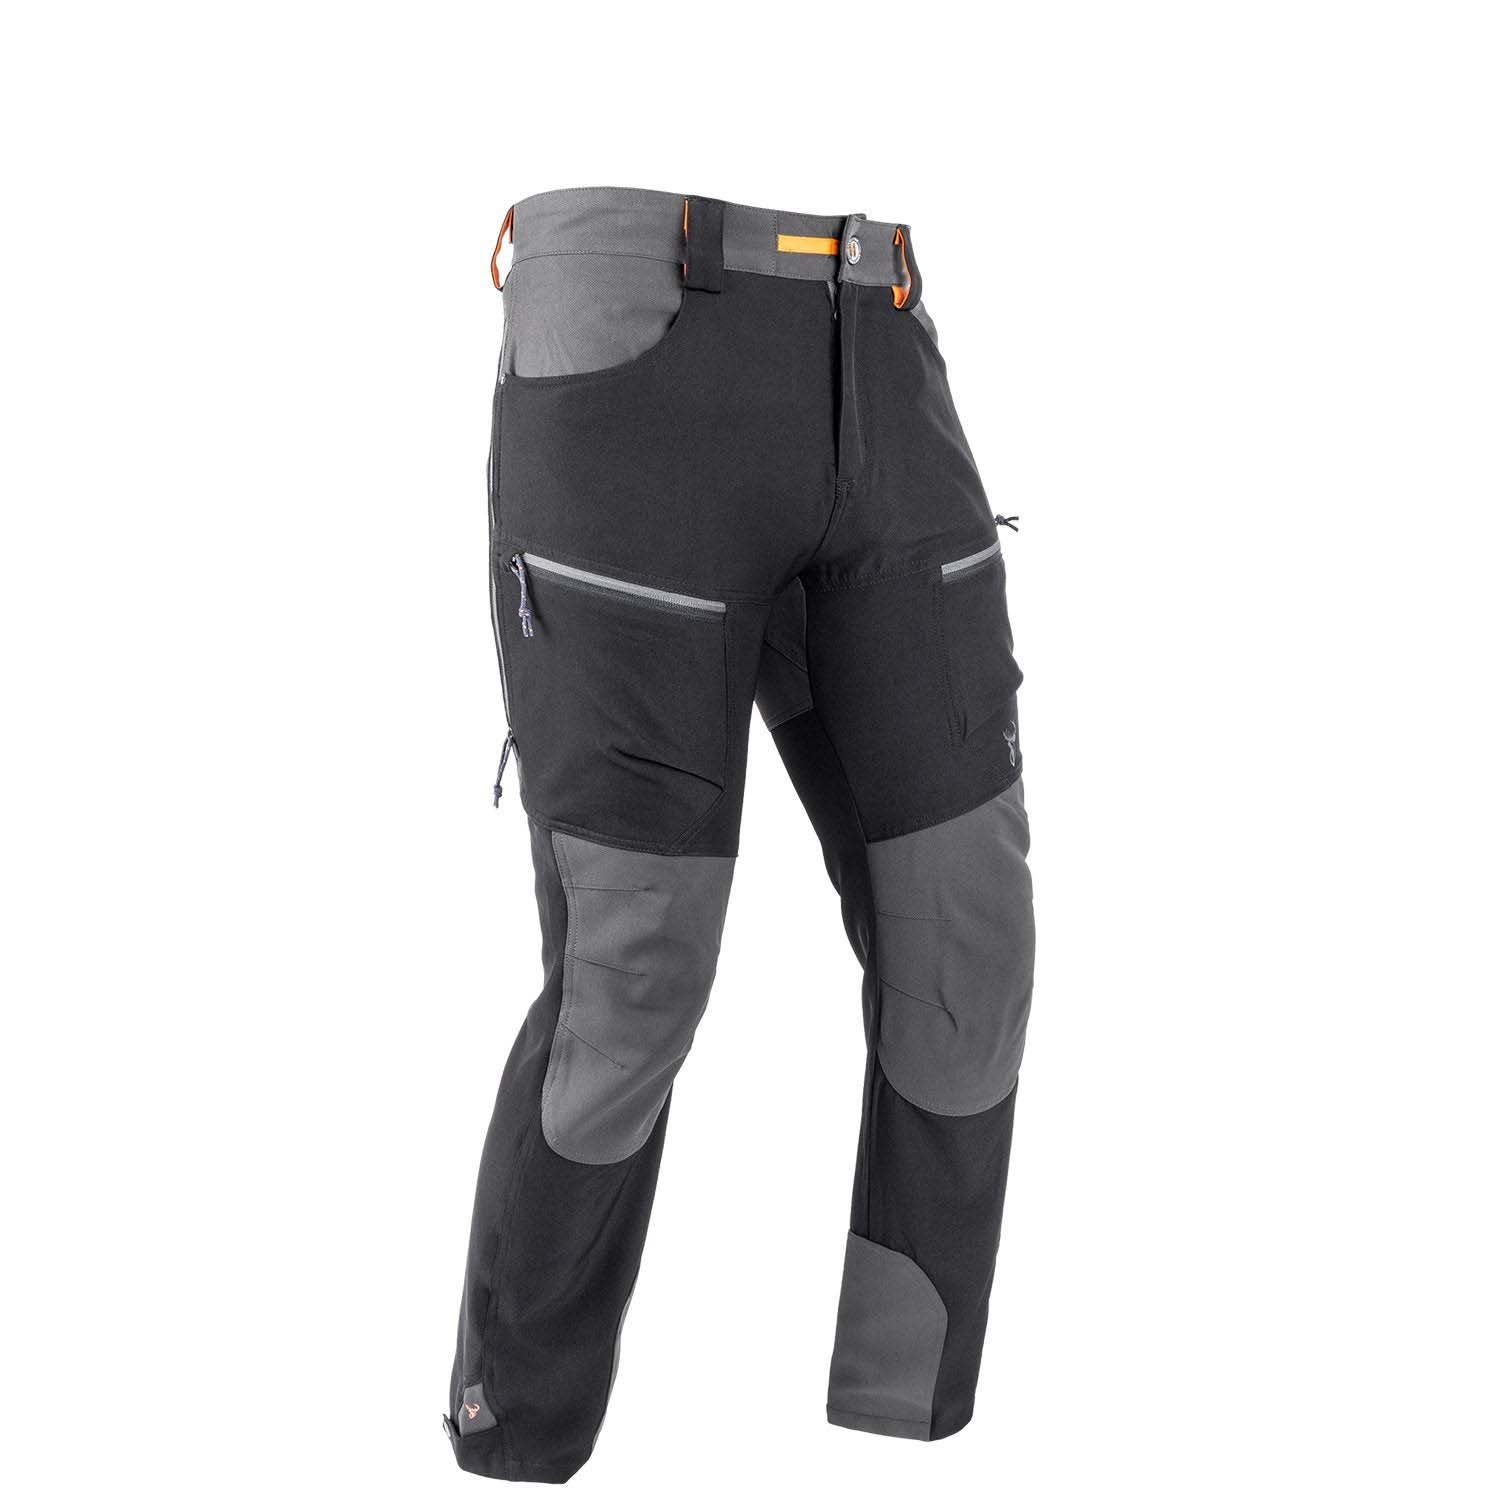 Hunters Element Spur Pants - Black/Grey - XS / Black/Grey - Mansfield Hunting & Fishing - Products to prepare for Corona Virus